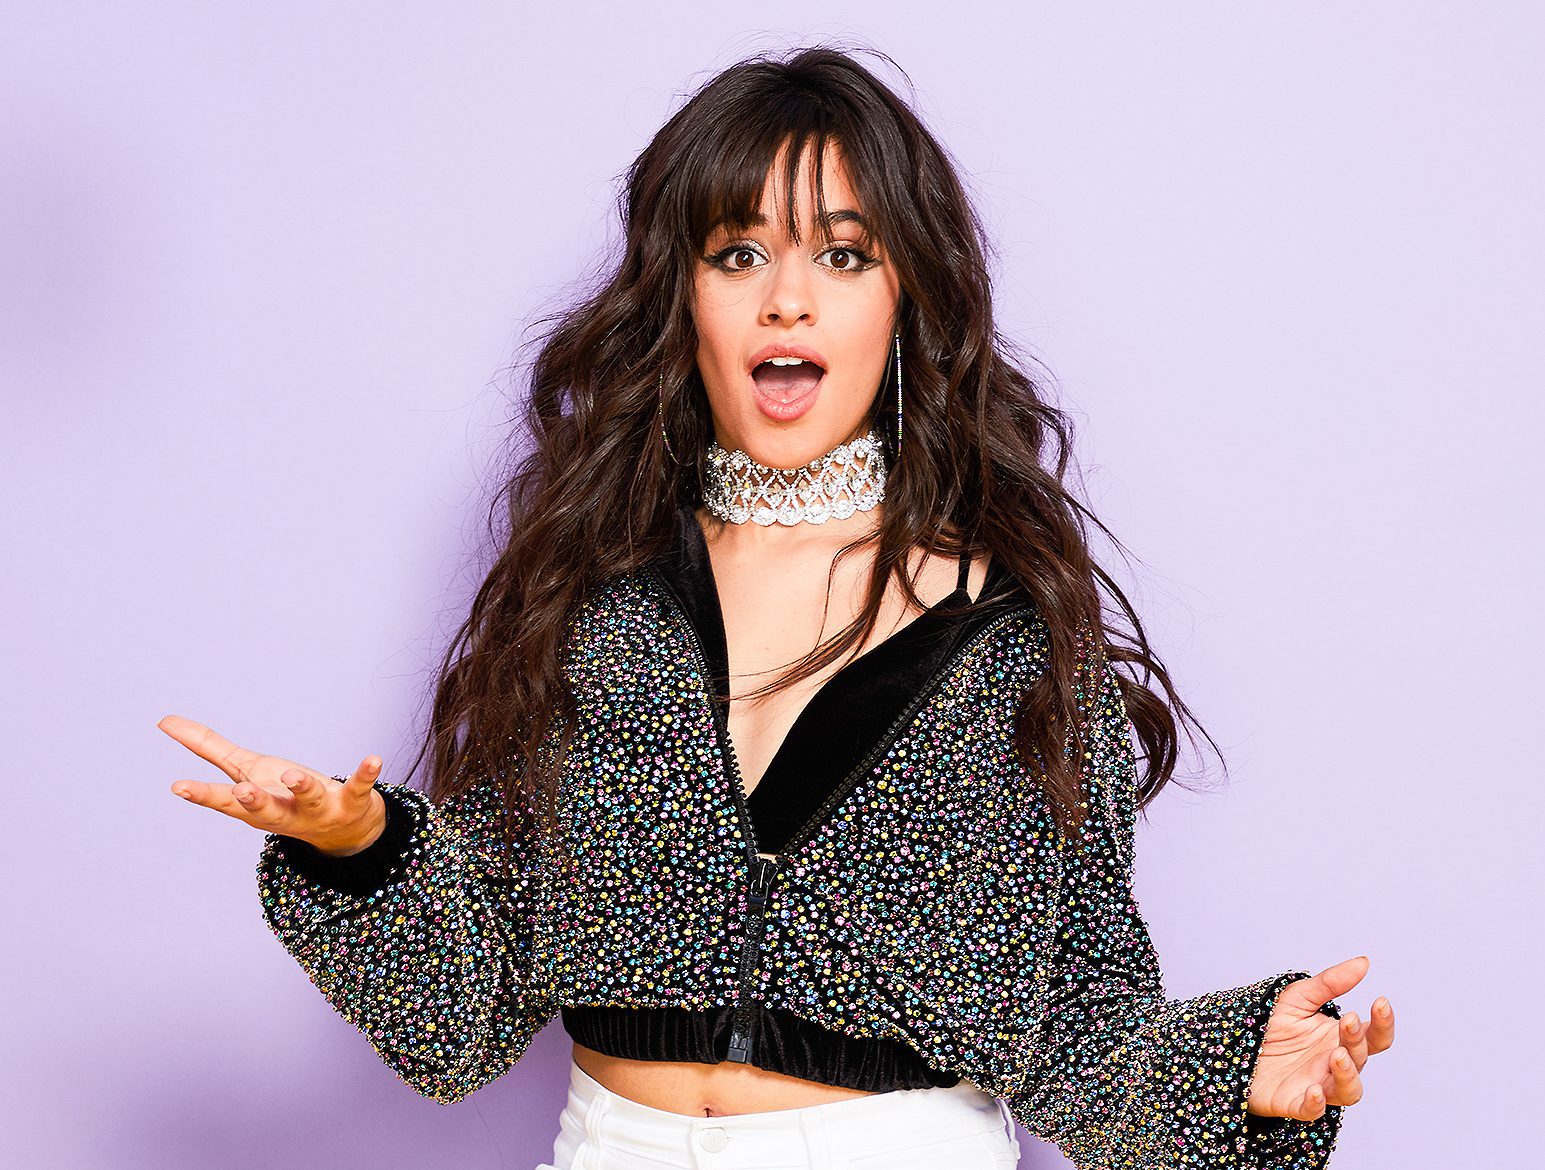 Camila Cabello and Grey are running for the “Crown” with new song